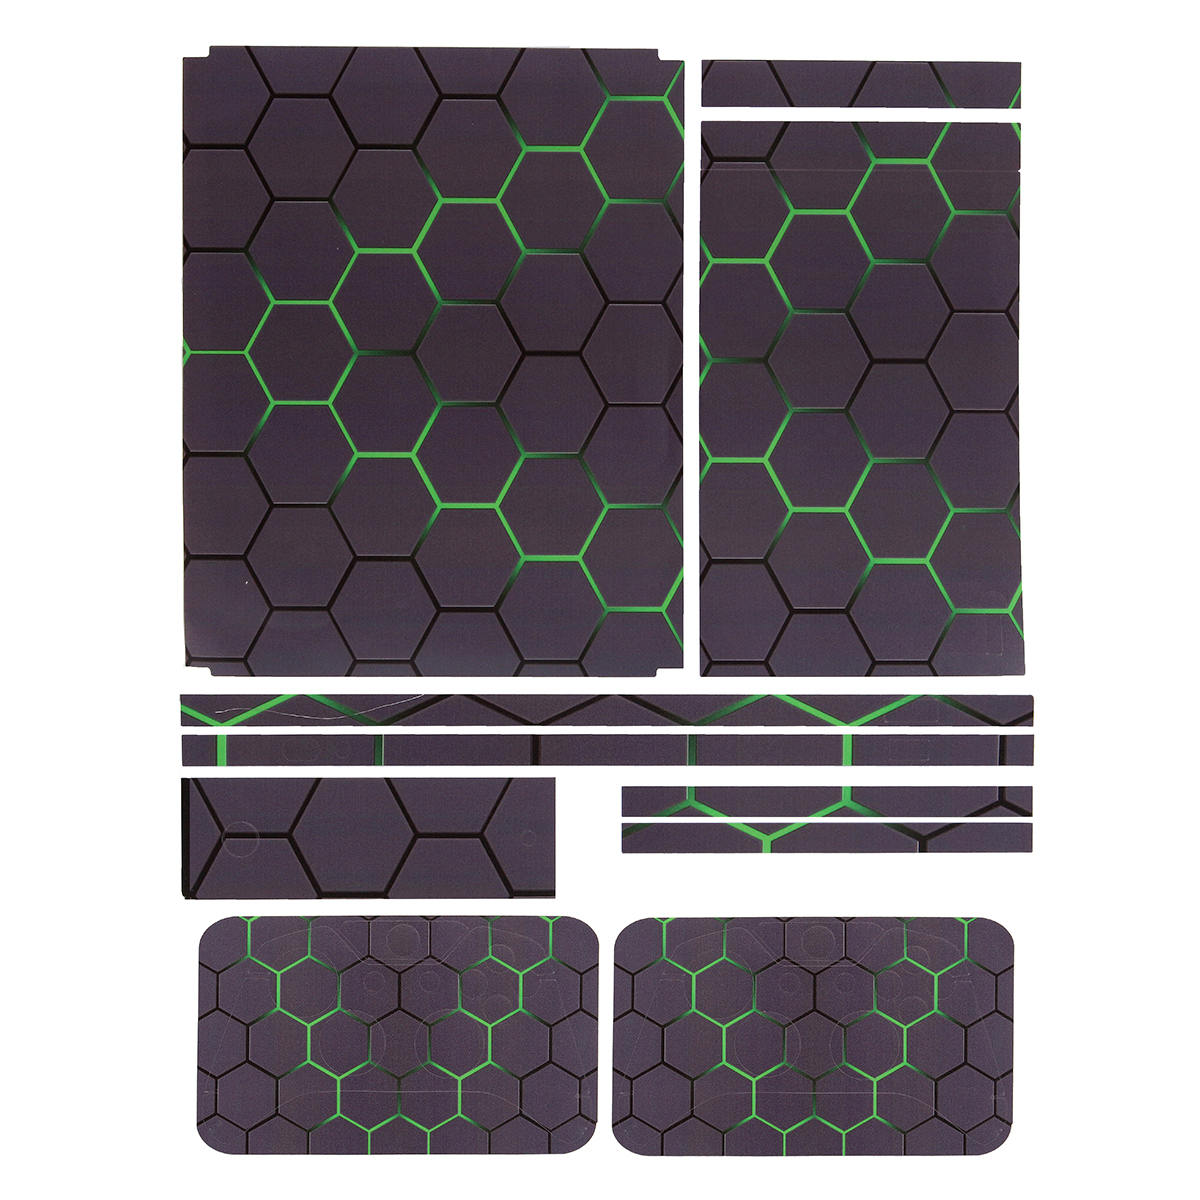 Green Grid Vinyl Decal Skin Stickers Cover for Xbox One S Game Console&2 Controllers 39